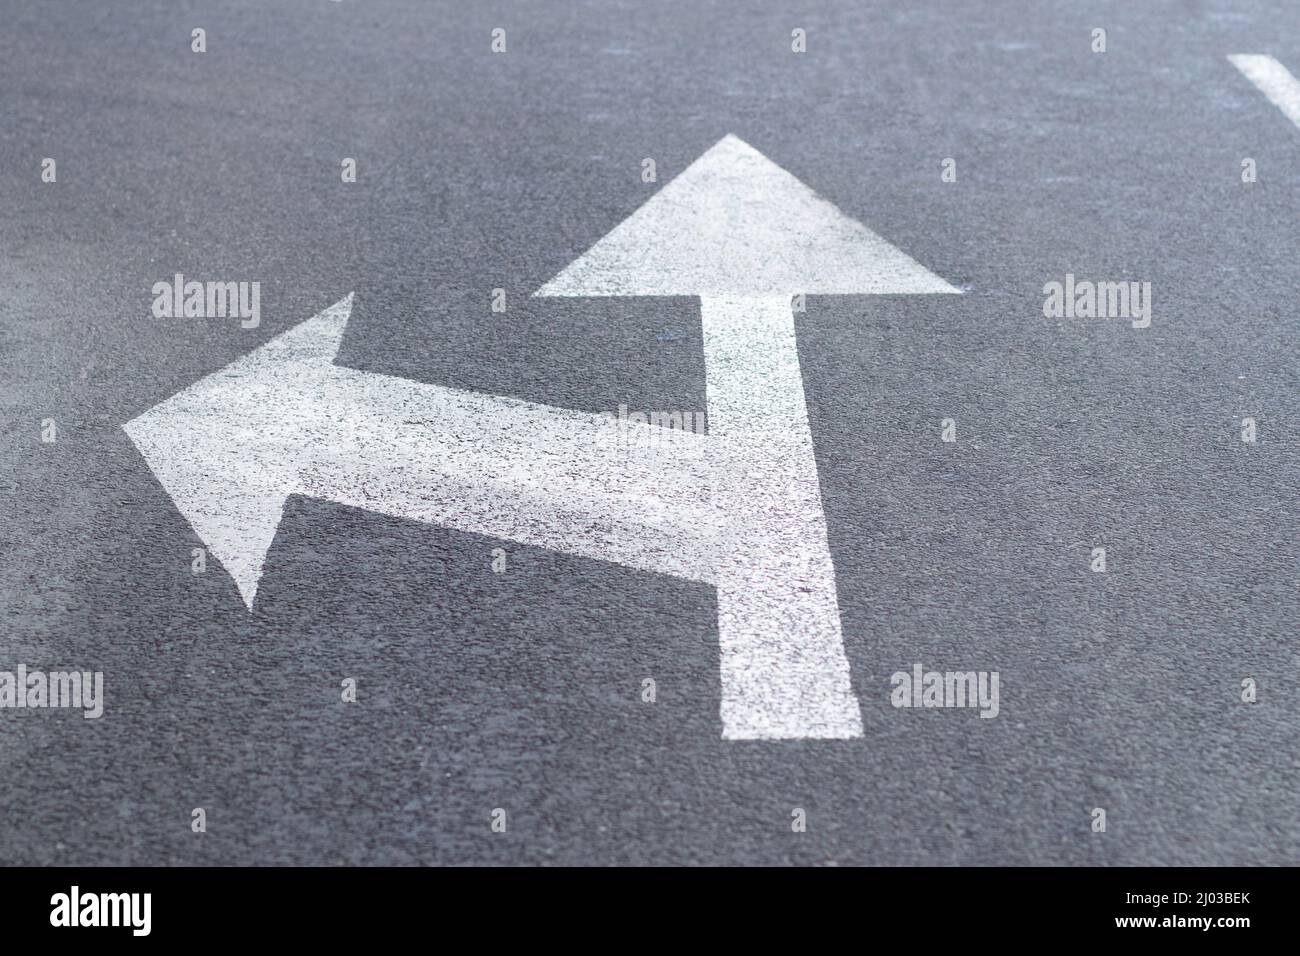 Arrows of road markings on an asphalt road for the direction of movement straight or to the left Stock Photo